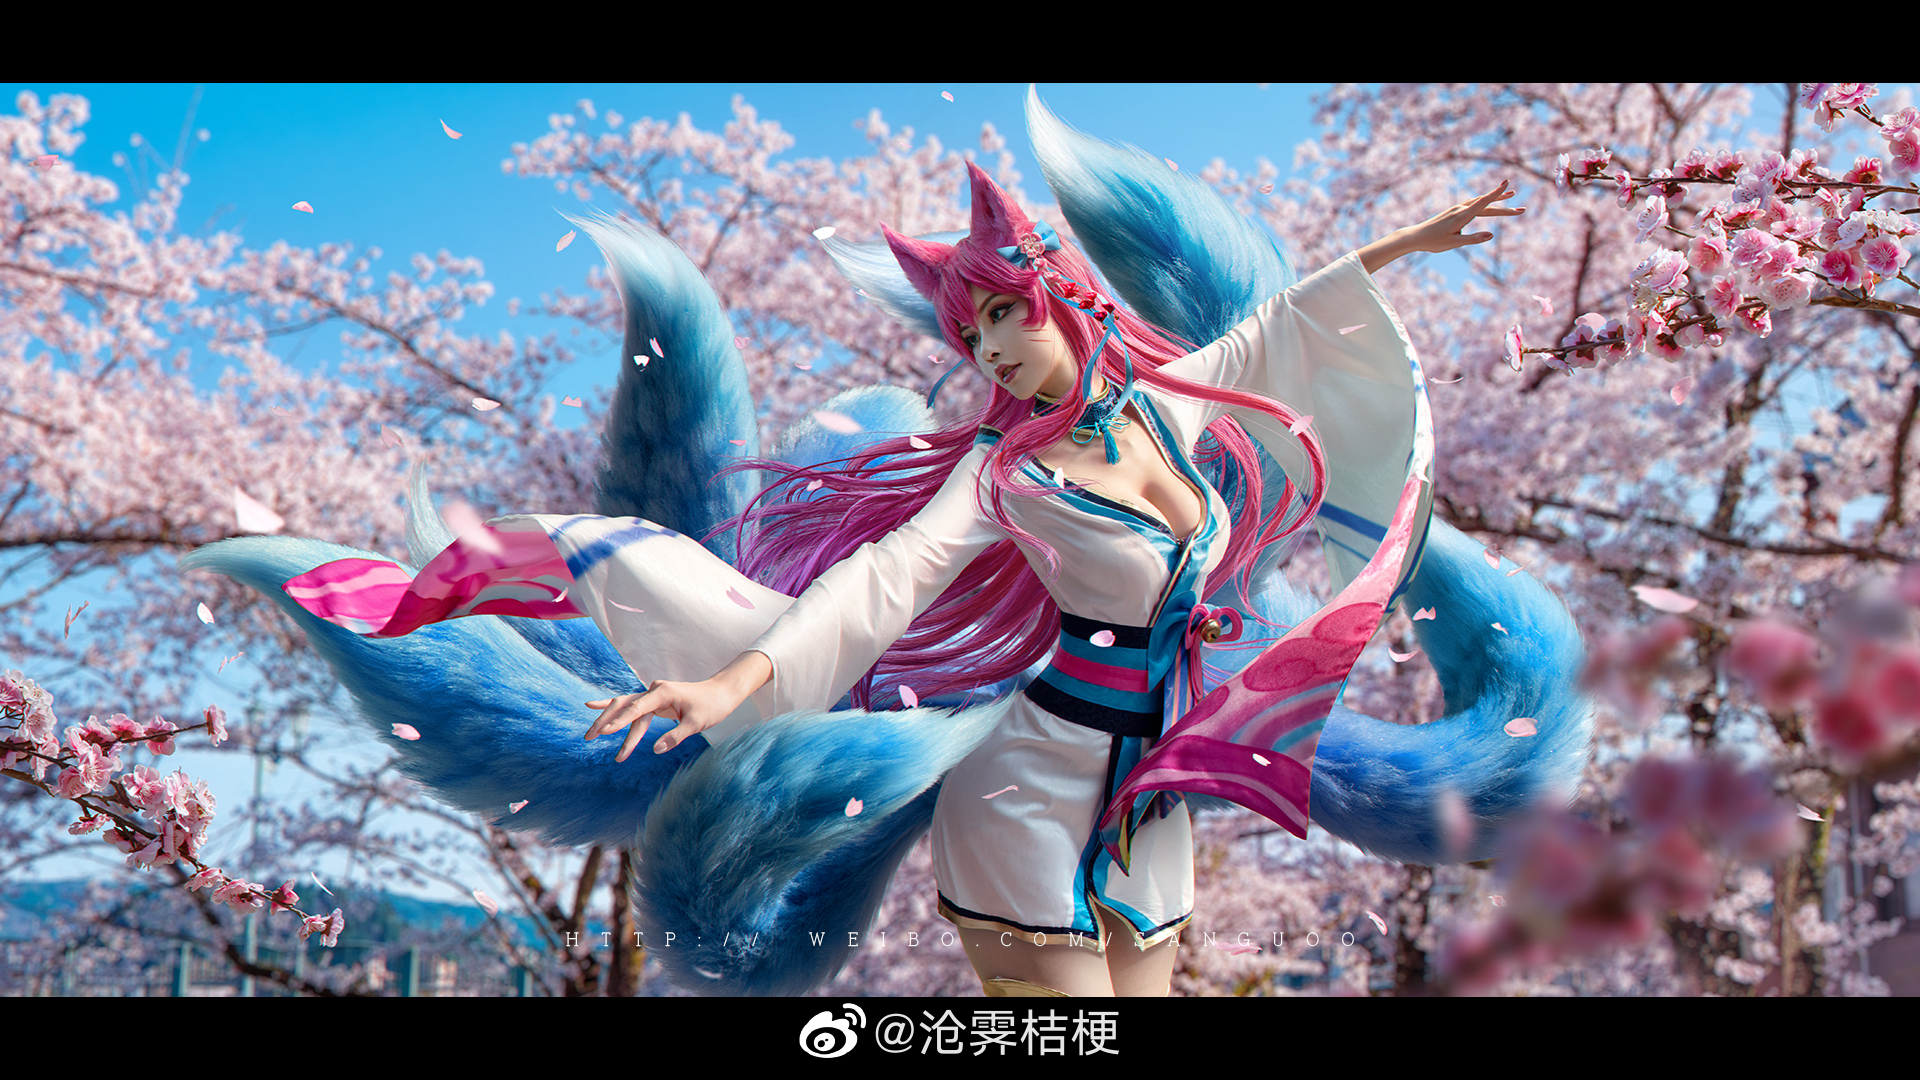 People 1920x1080 cosplay Asian women Ahri (League of Legends) League of Legends spirit blossom video game characters